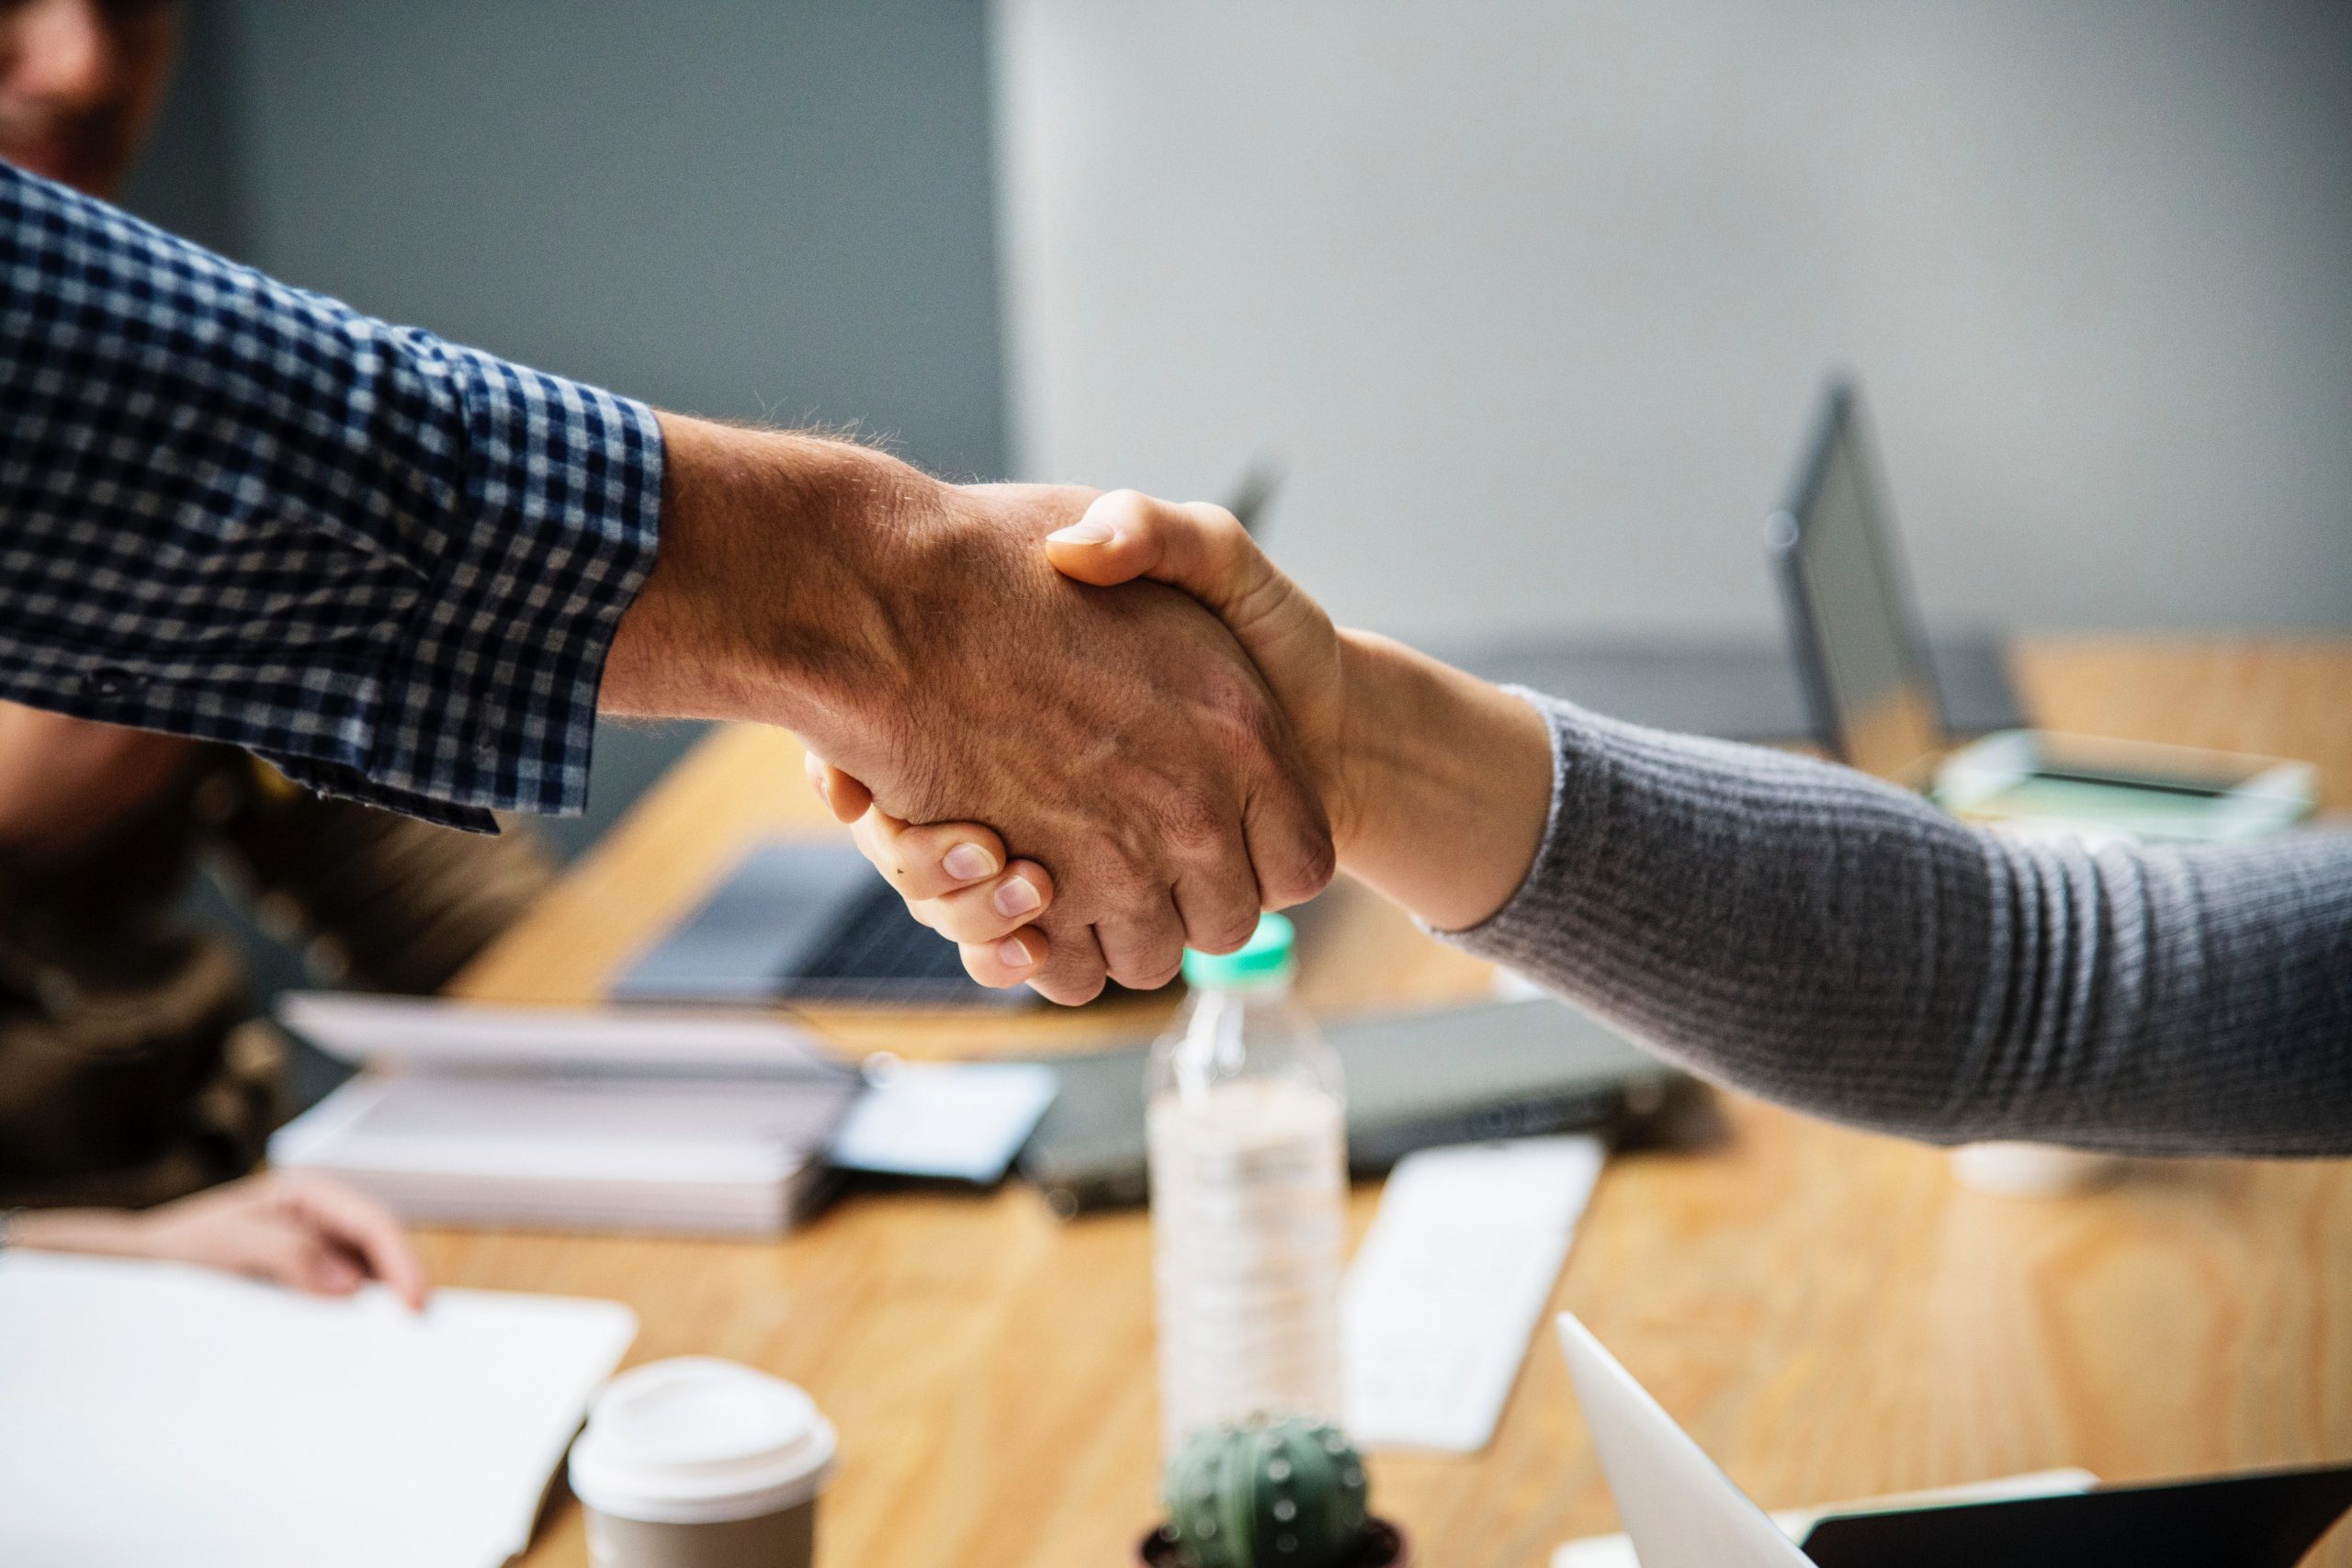 Shake hands of two adults doing business deal collaboration